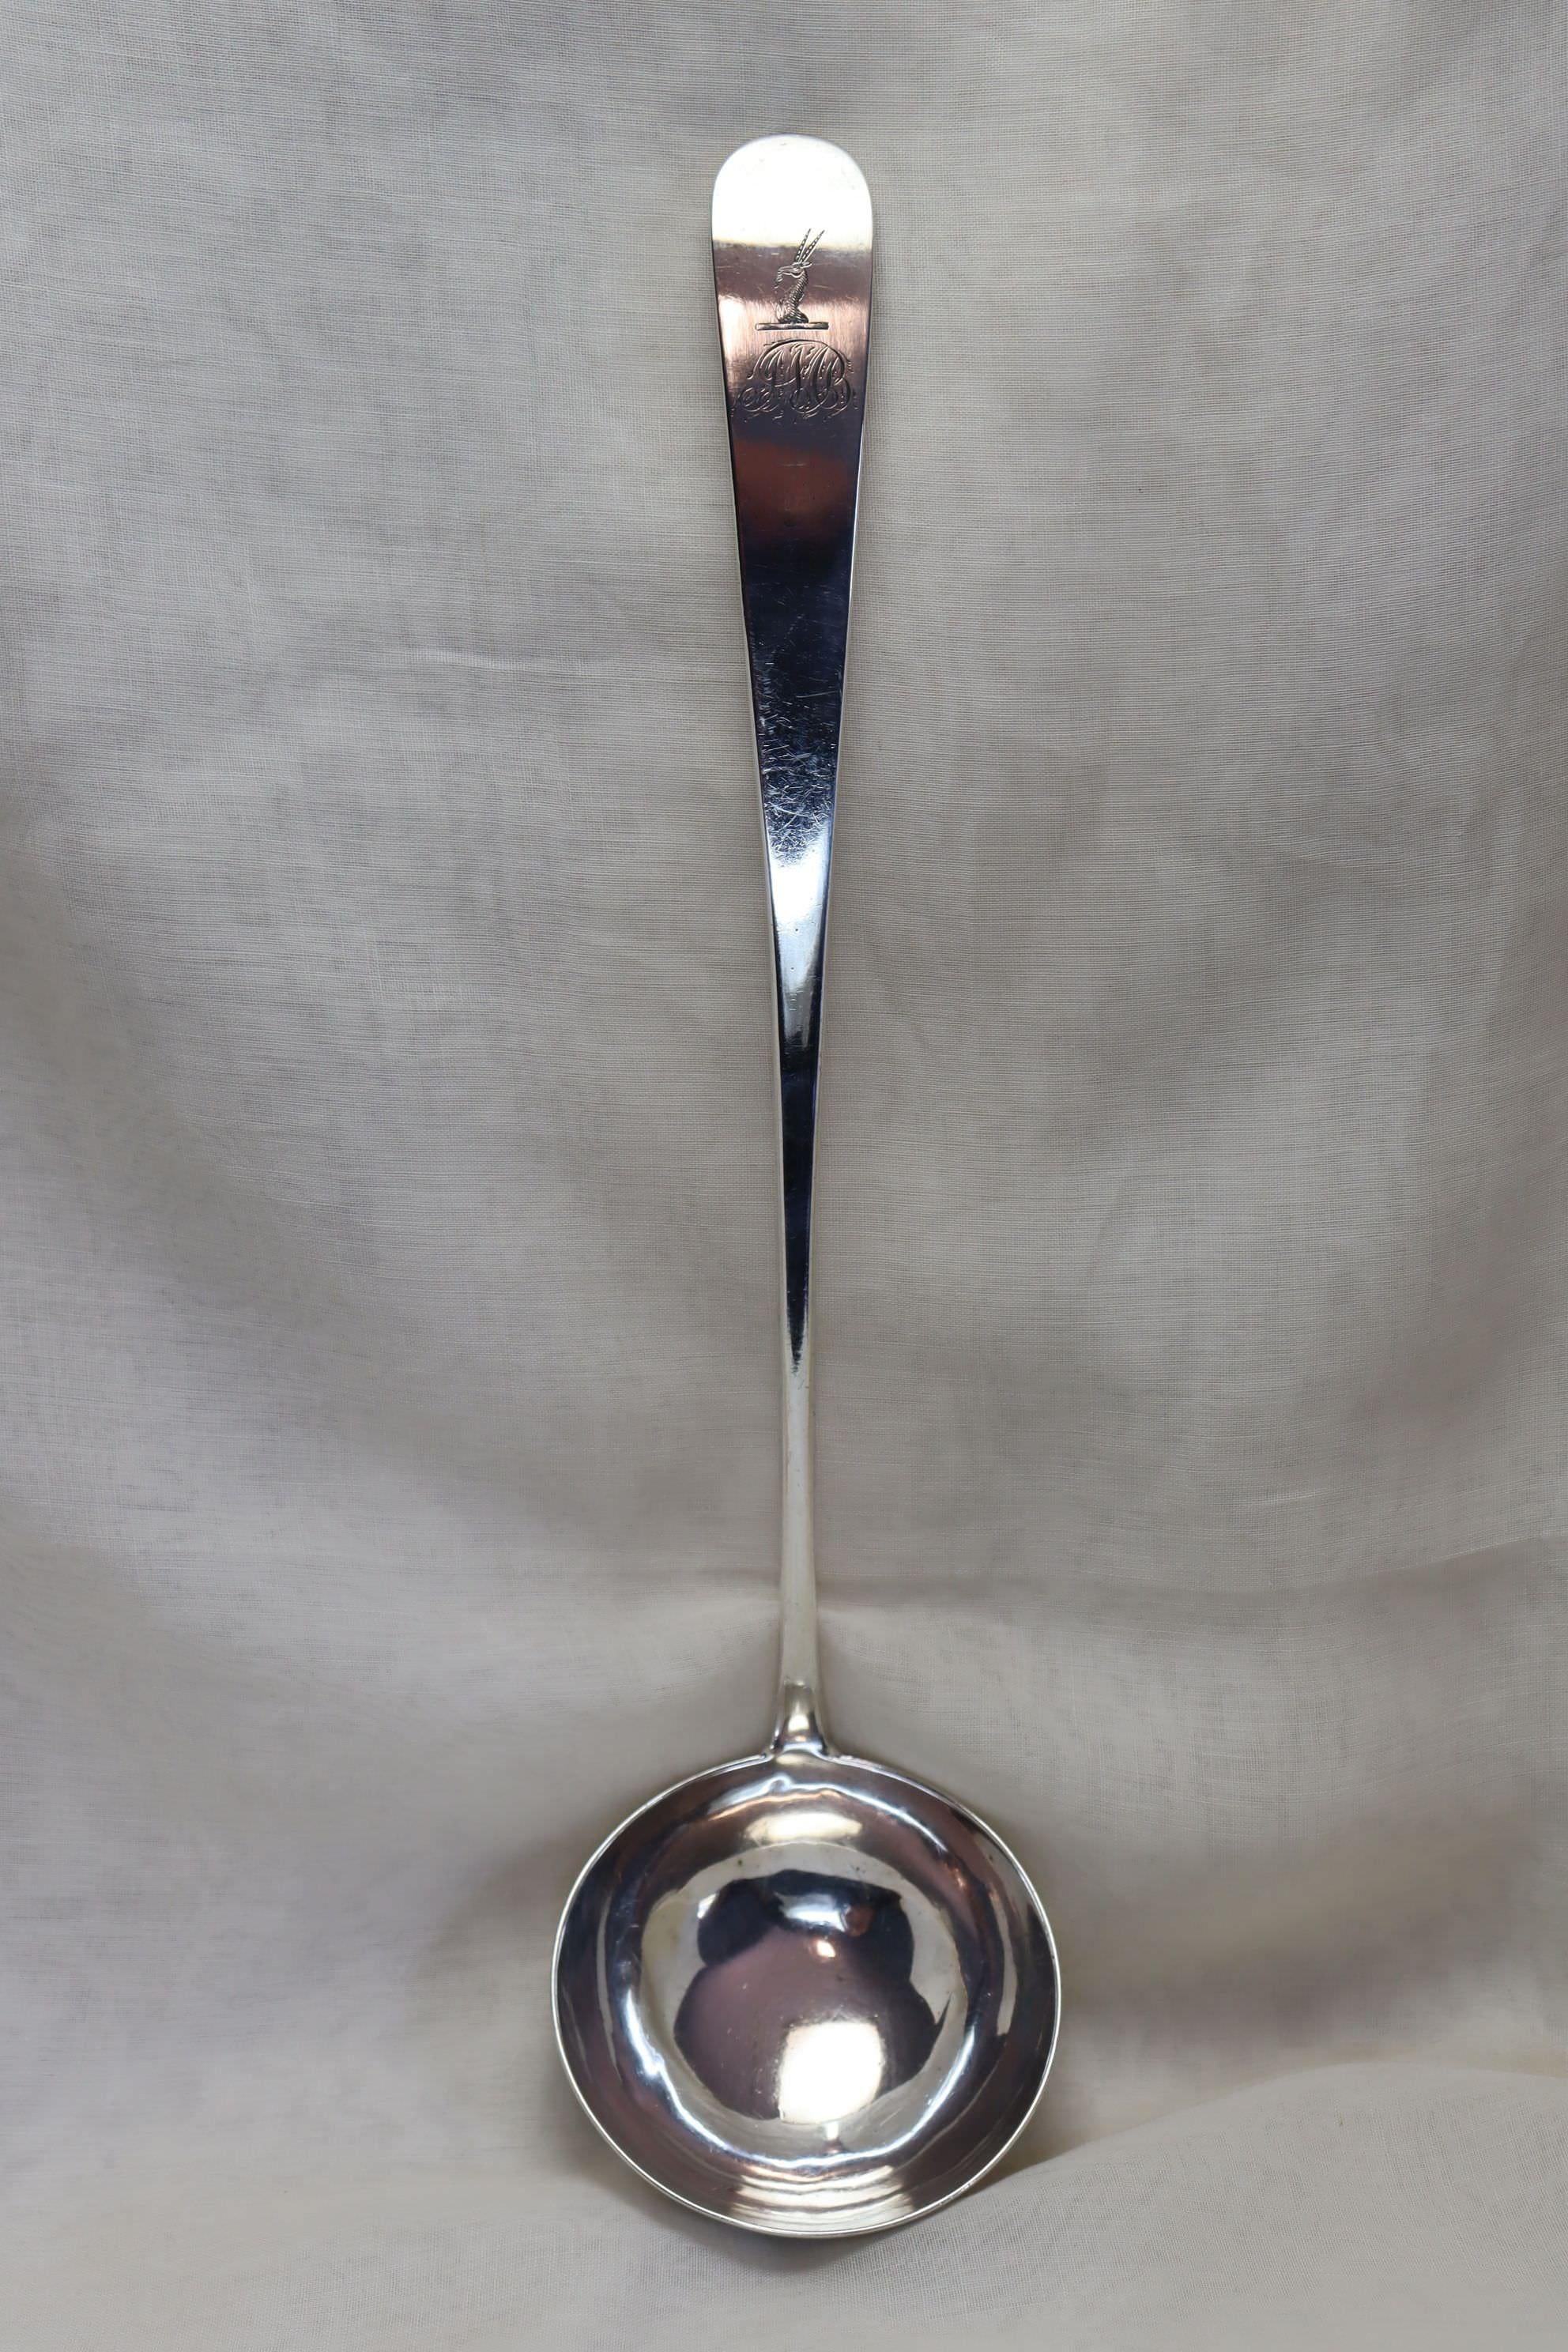 This large Georgian sterling silver soup ladle carries the makers mark for Graham and McLean of Glasgow and was assayed in Edinburgh in 1801. The long elegantly curved handle also carries a family crest, possibly Scottish, and the monogram I (or J)